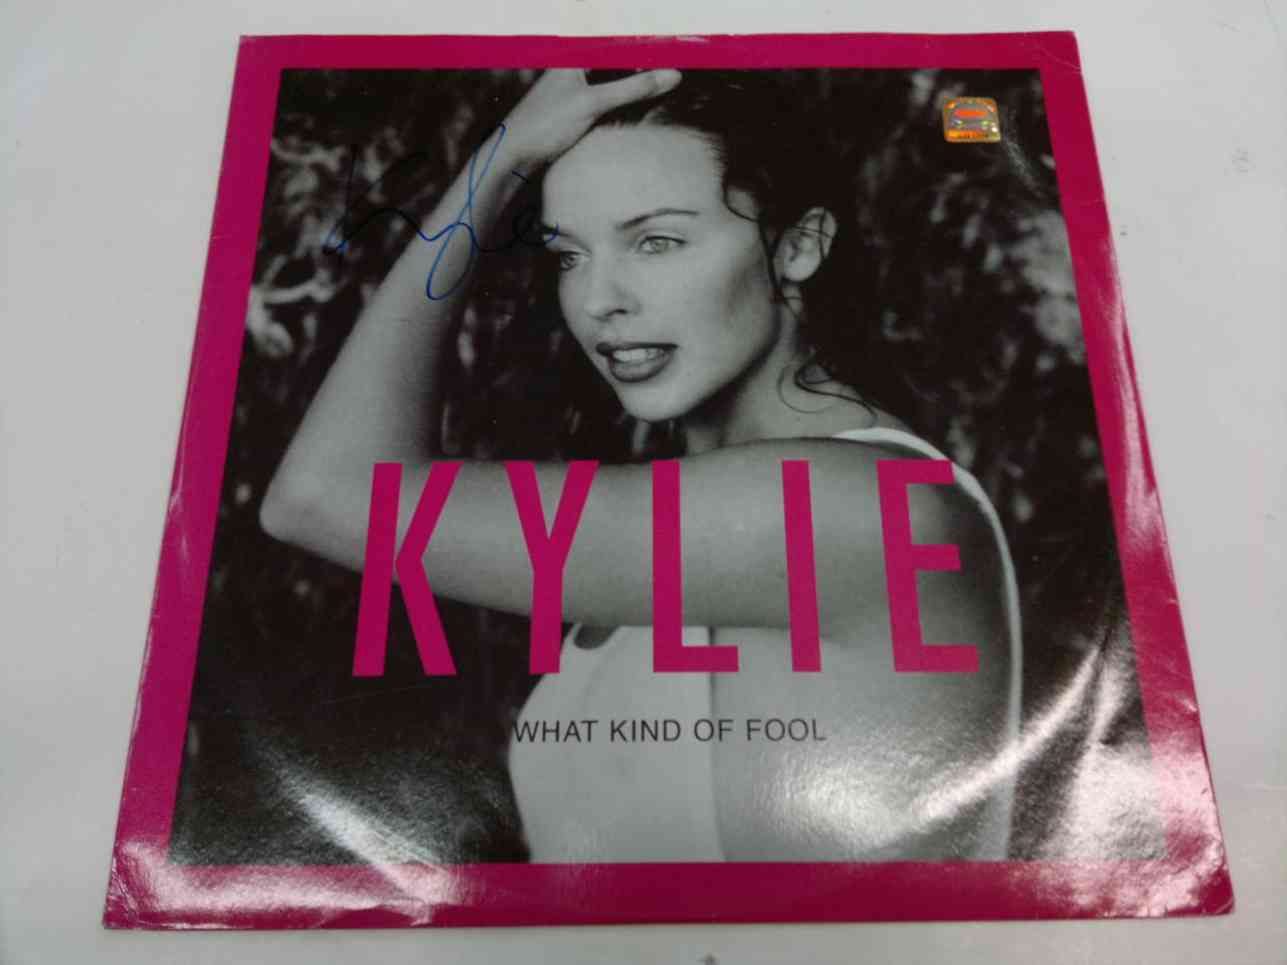 KYLIE MINOGUE - WHAT KIND OF FOOL - ORIGINAL SIGNED